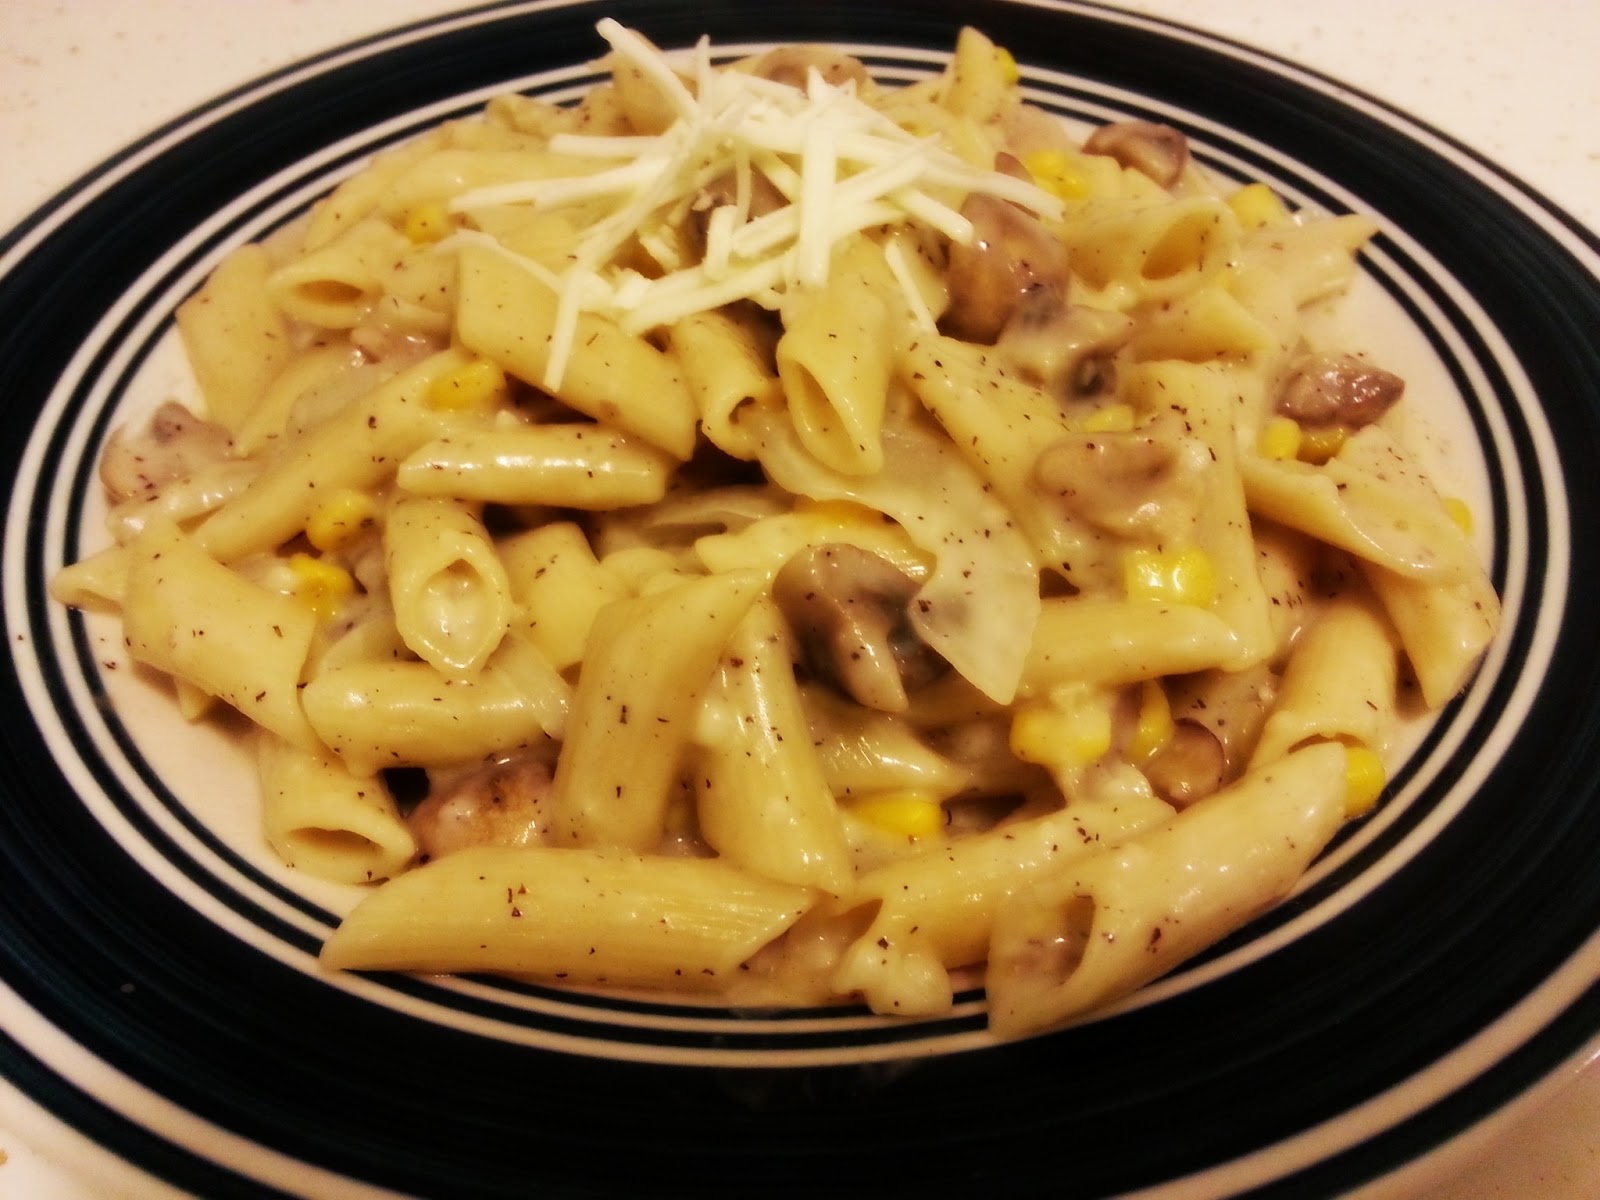 Penne with Mushroom and Chicken in White sauce